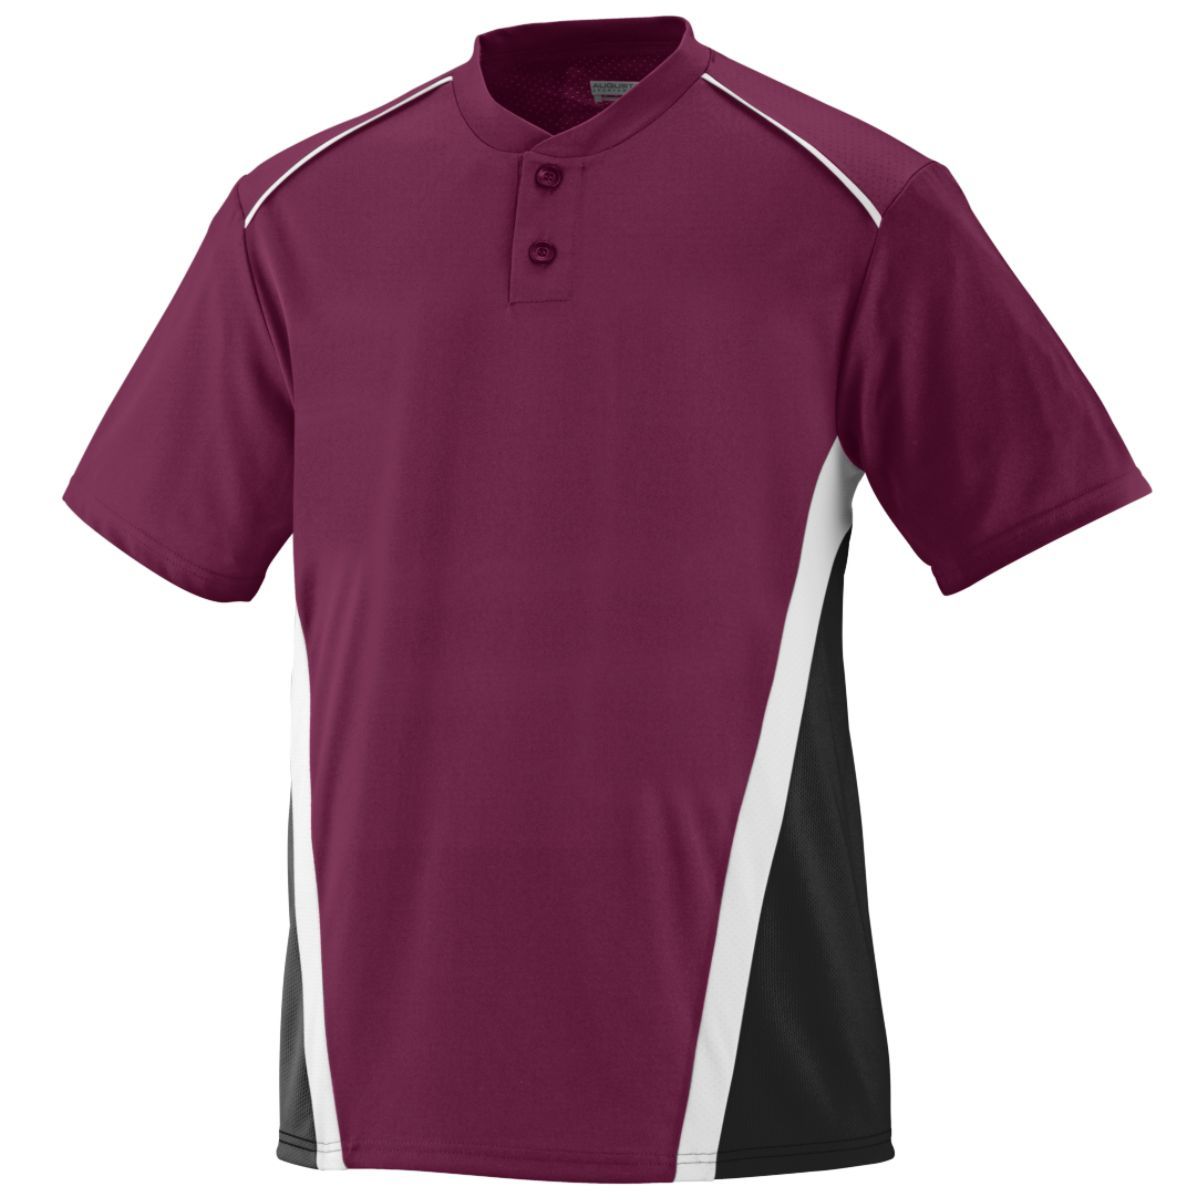 Augusta Sportswear Rbi Jersey in Maroon/Black/White  -Part of the Adult, Adult-Jersey, Augusta-Products, Softball, Shirts product lines at KanaleyCreations.com